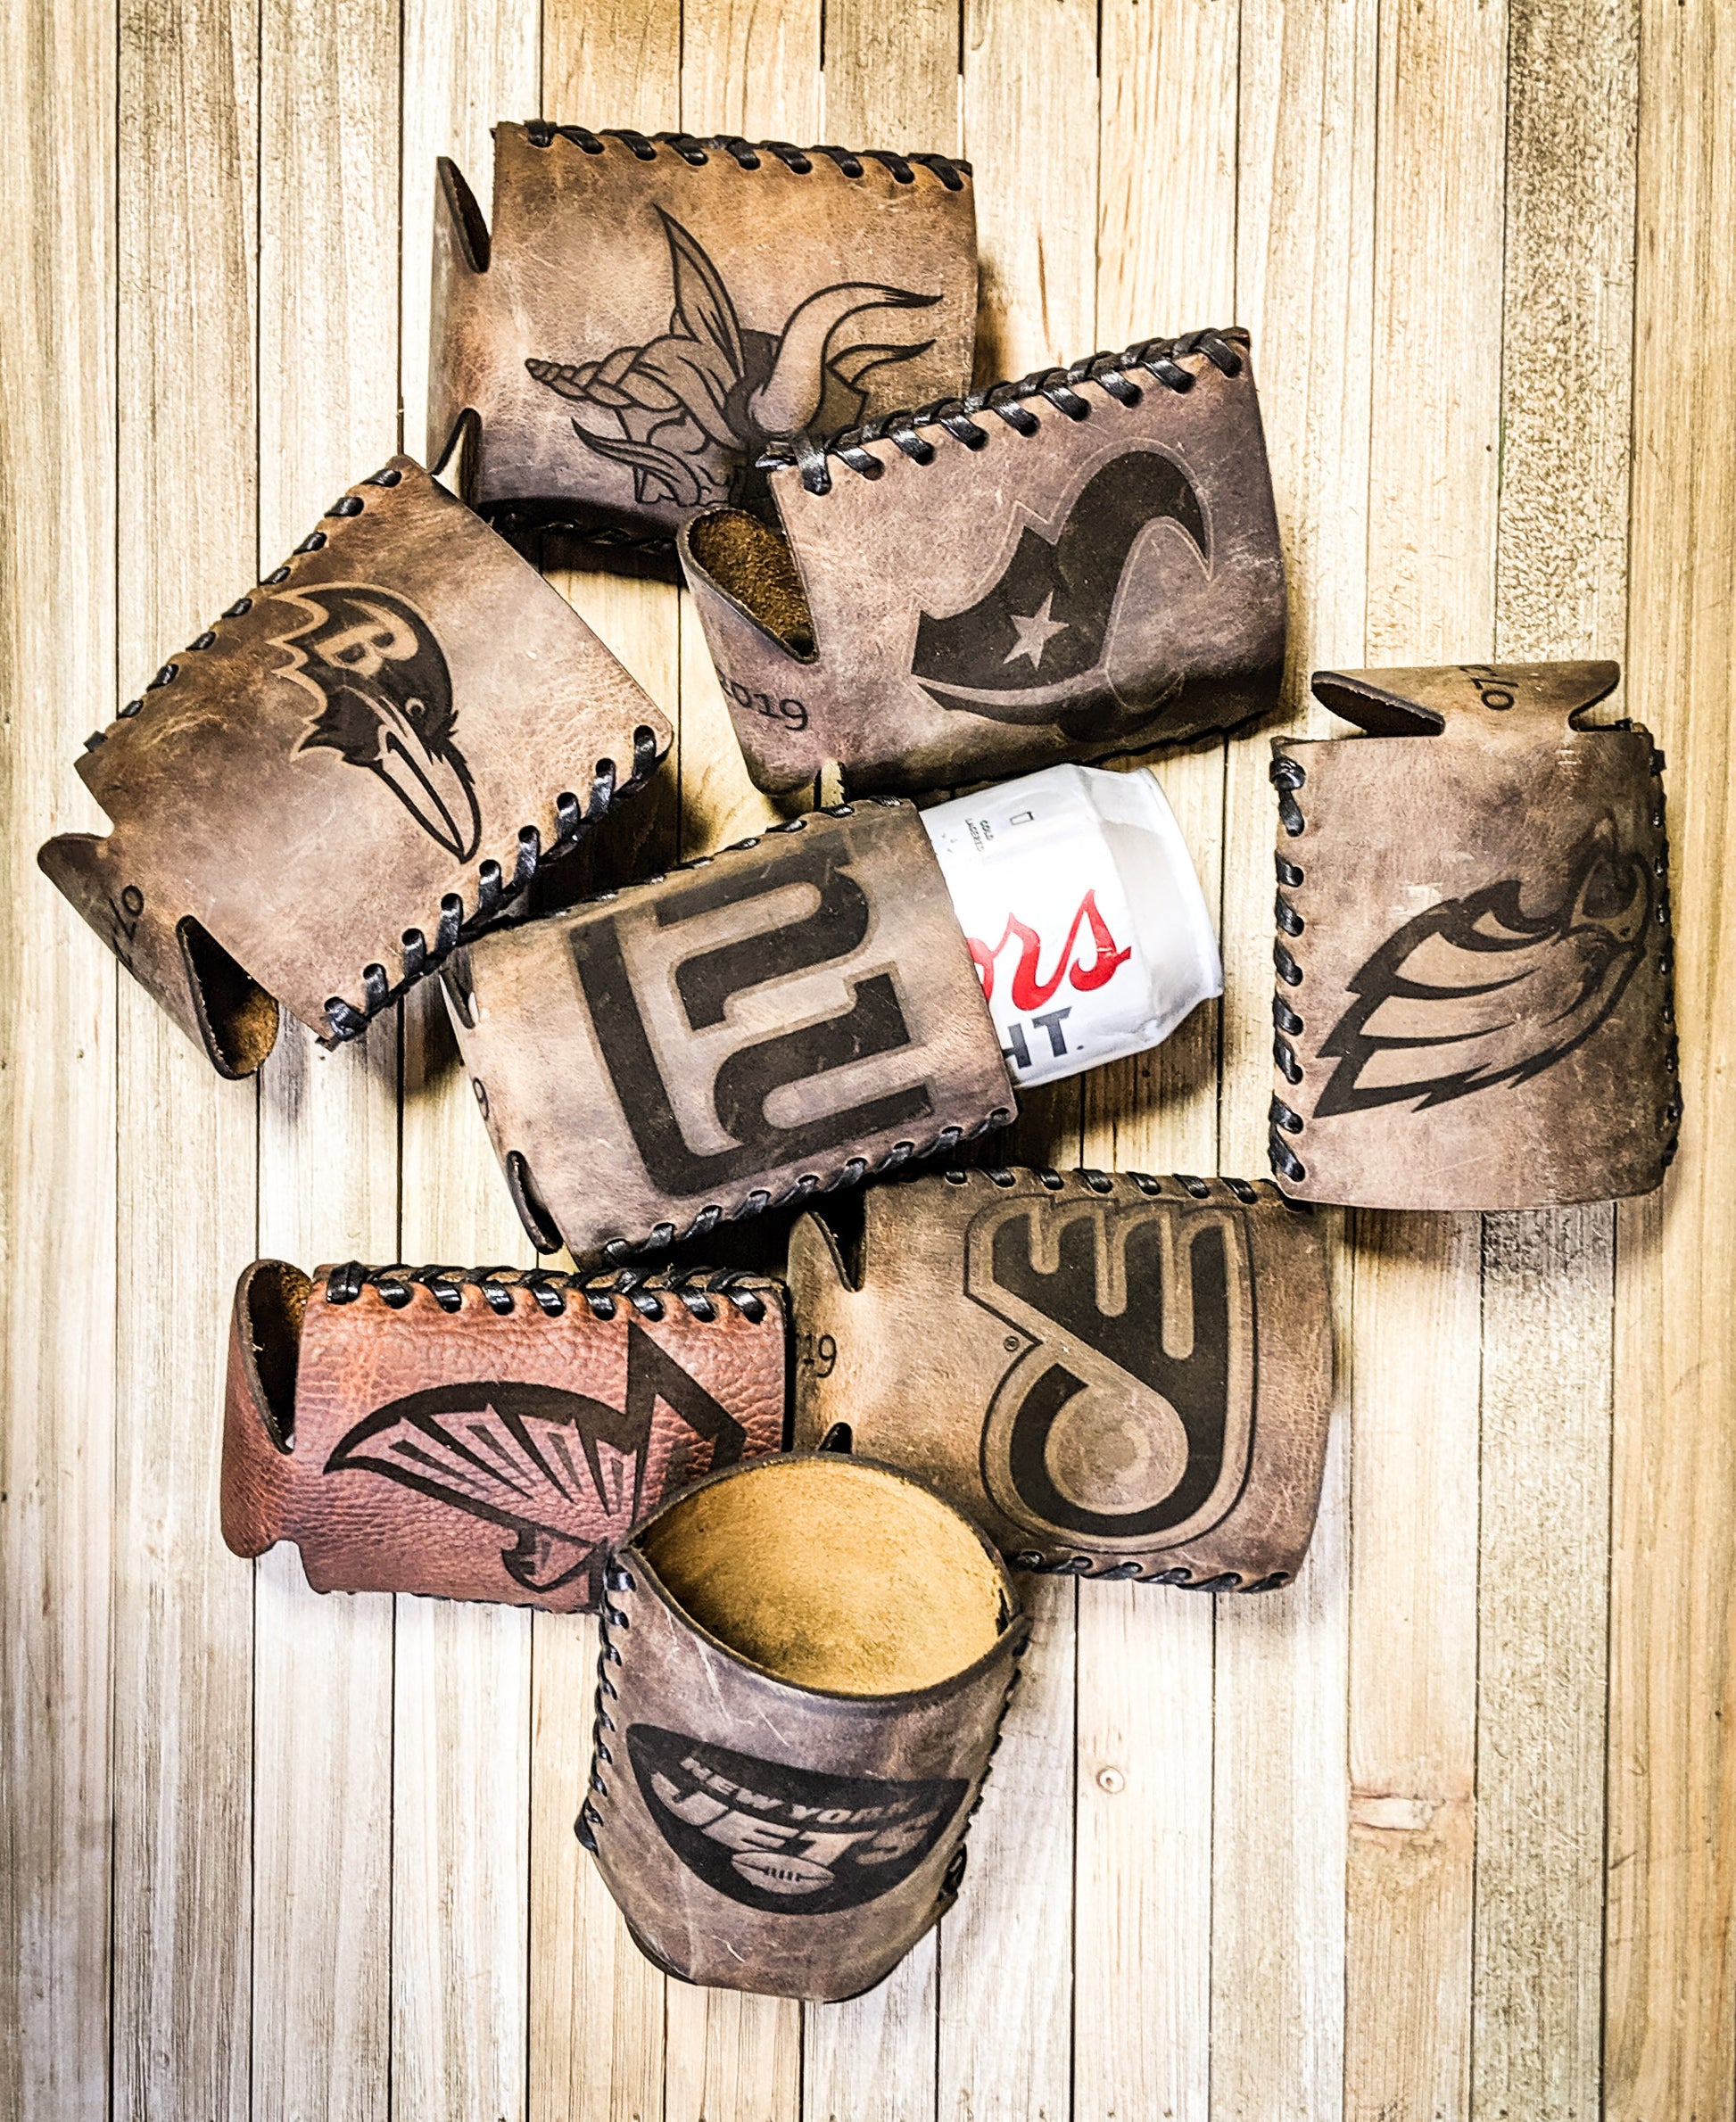 Premium leather football koozies with NFL teams perfect gift for men perfect Father's Day gift perfect Christmas gift for guys